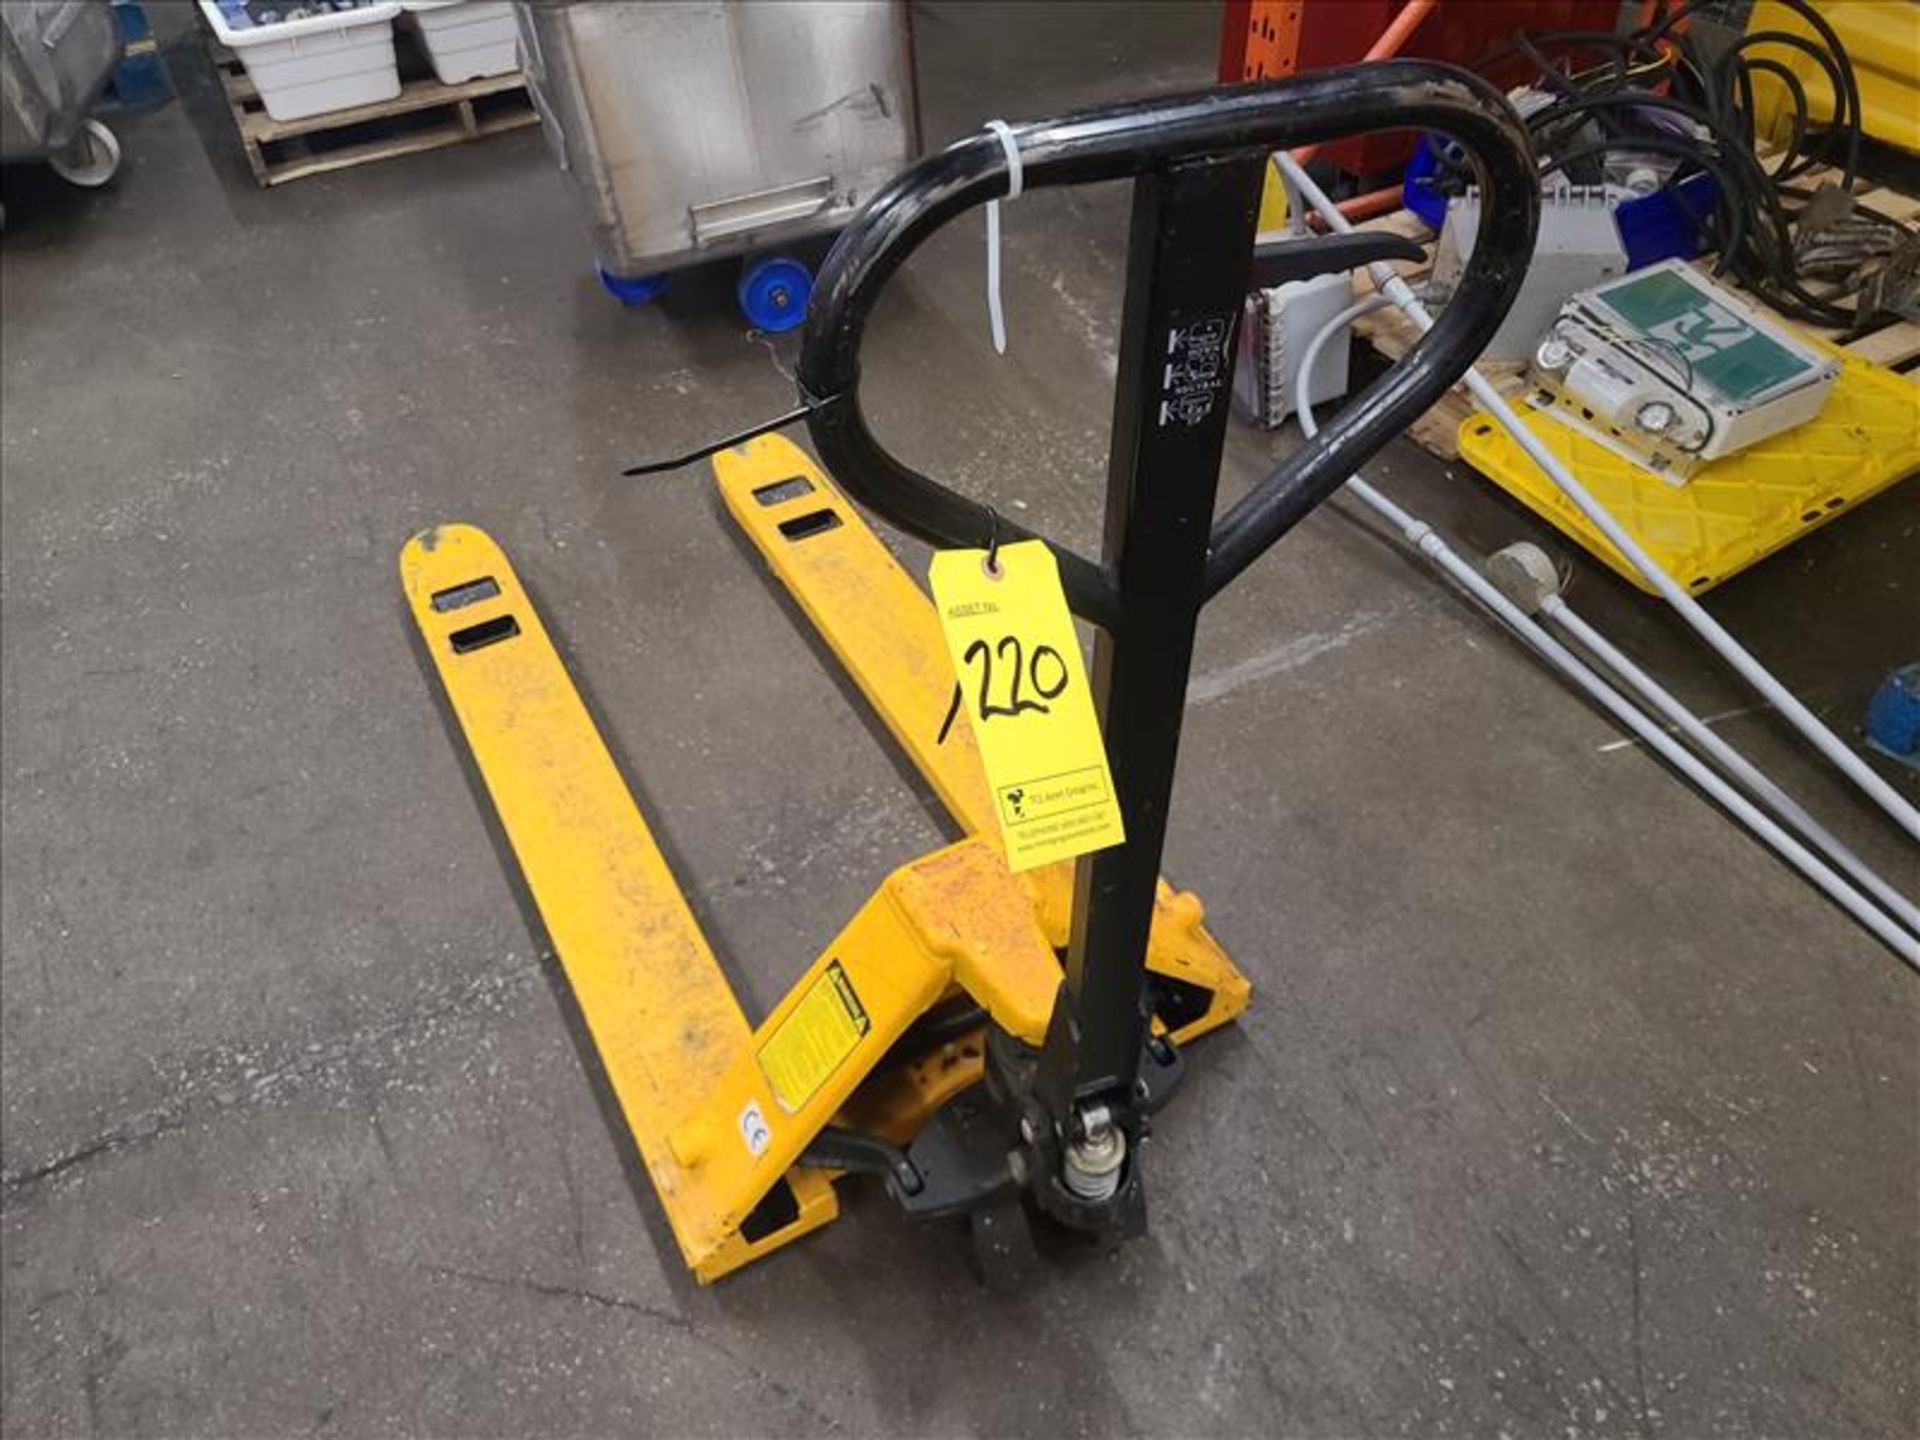 Pallet Truck, 5500 lbs. capacity [Loc.throughout plant] (delayed removal applies)